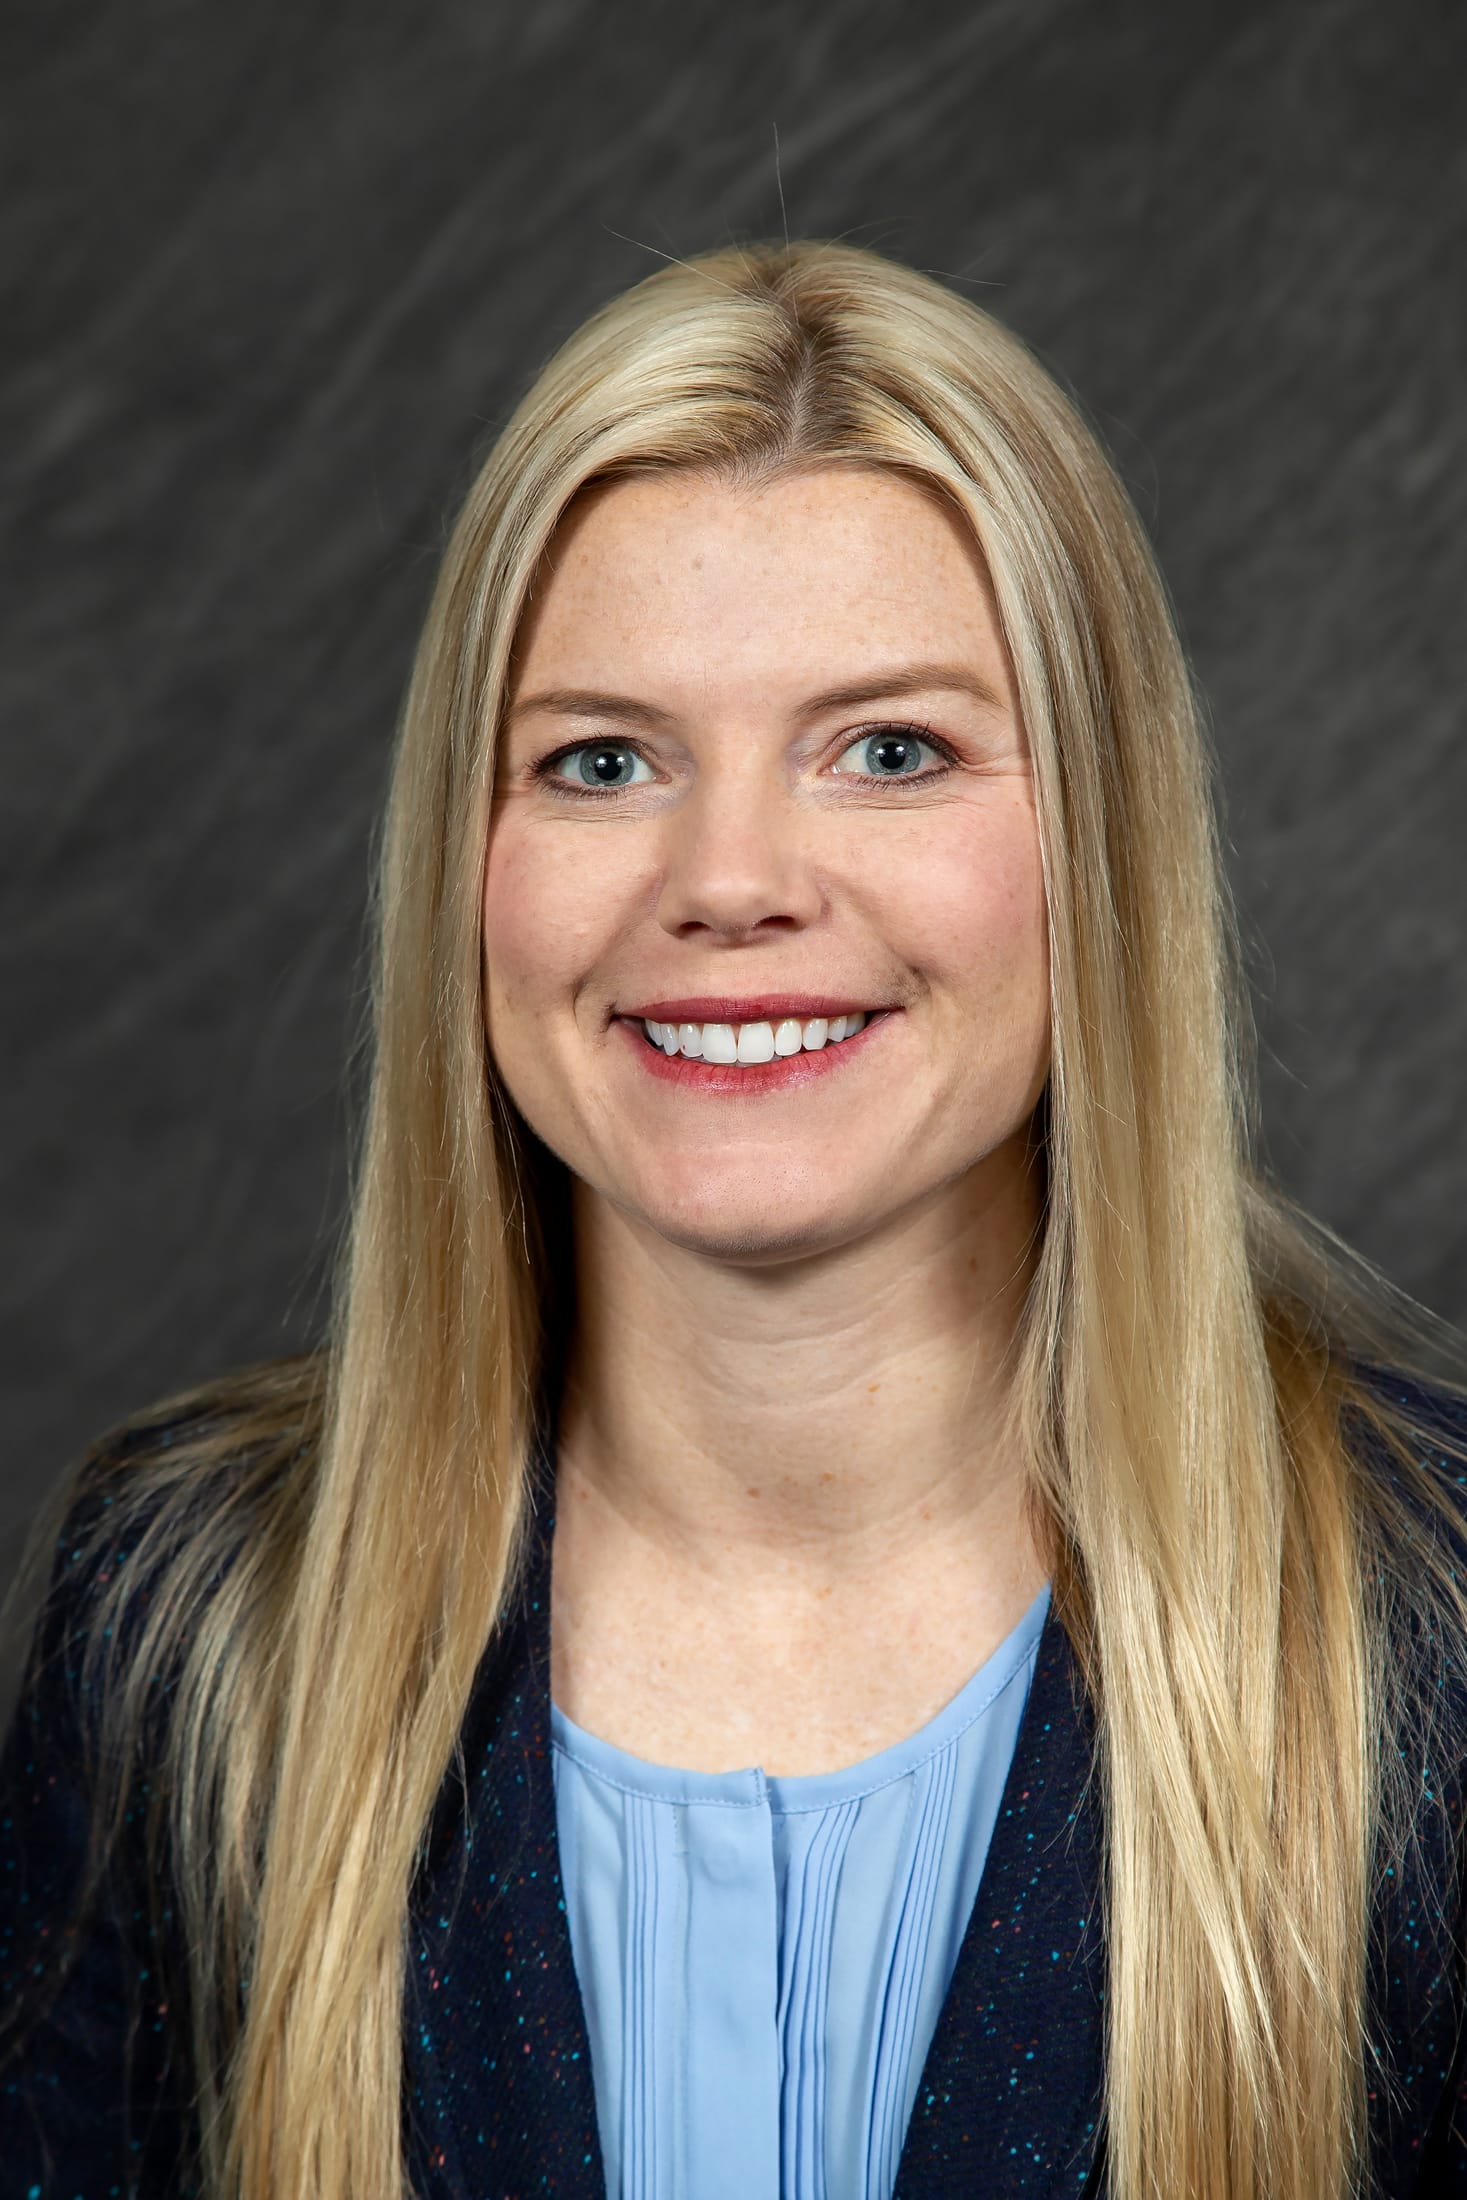 Headshot of CPN Health Services' Dr. Kassi Sexton. She has long blonde hair, blue eyes and wears a light blue blouse.